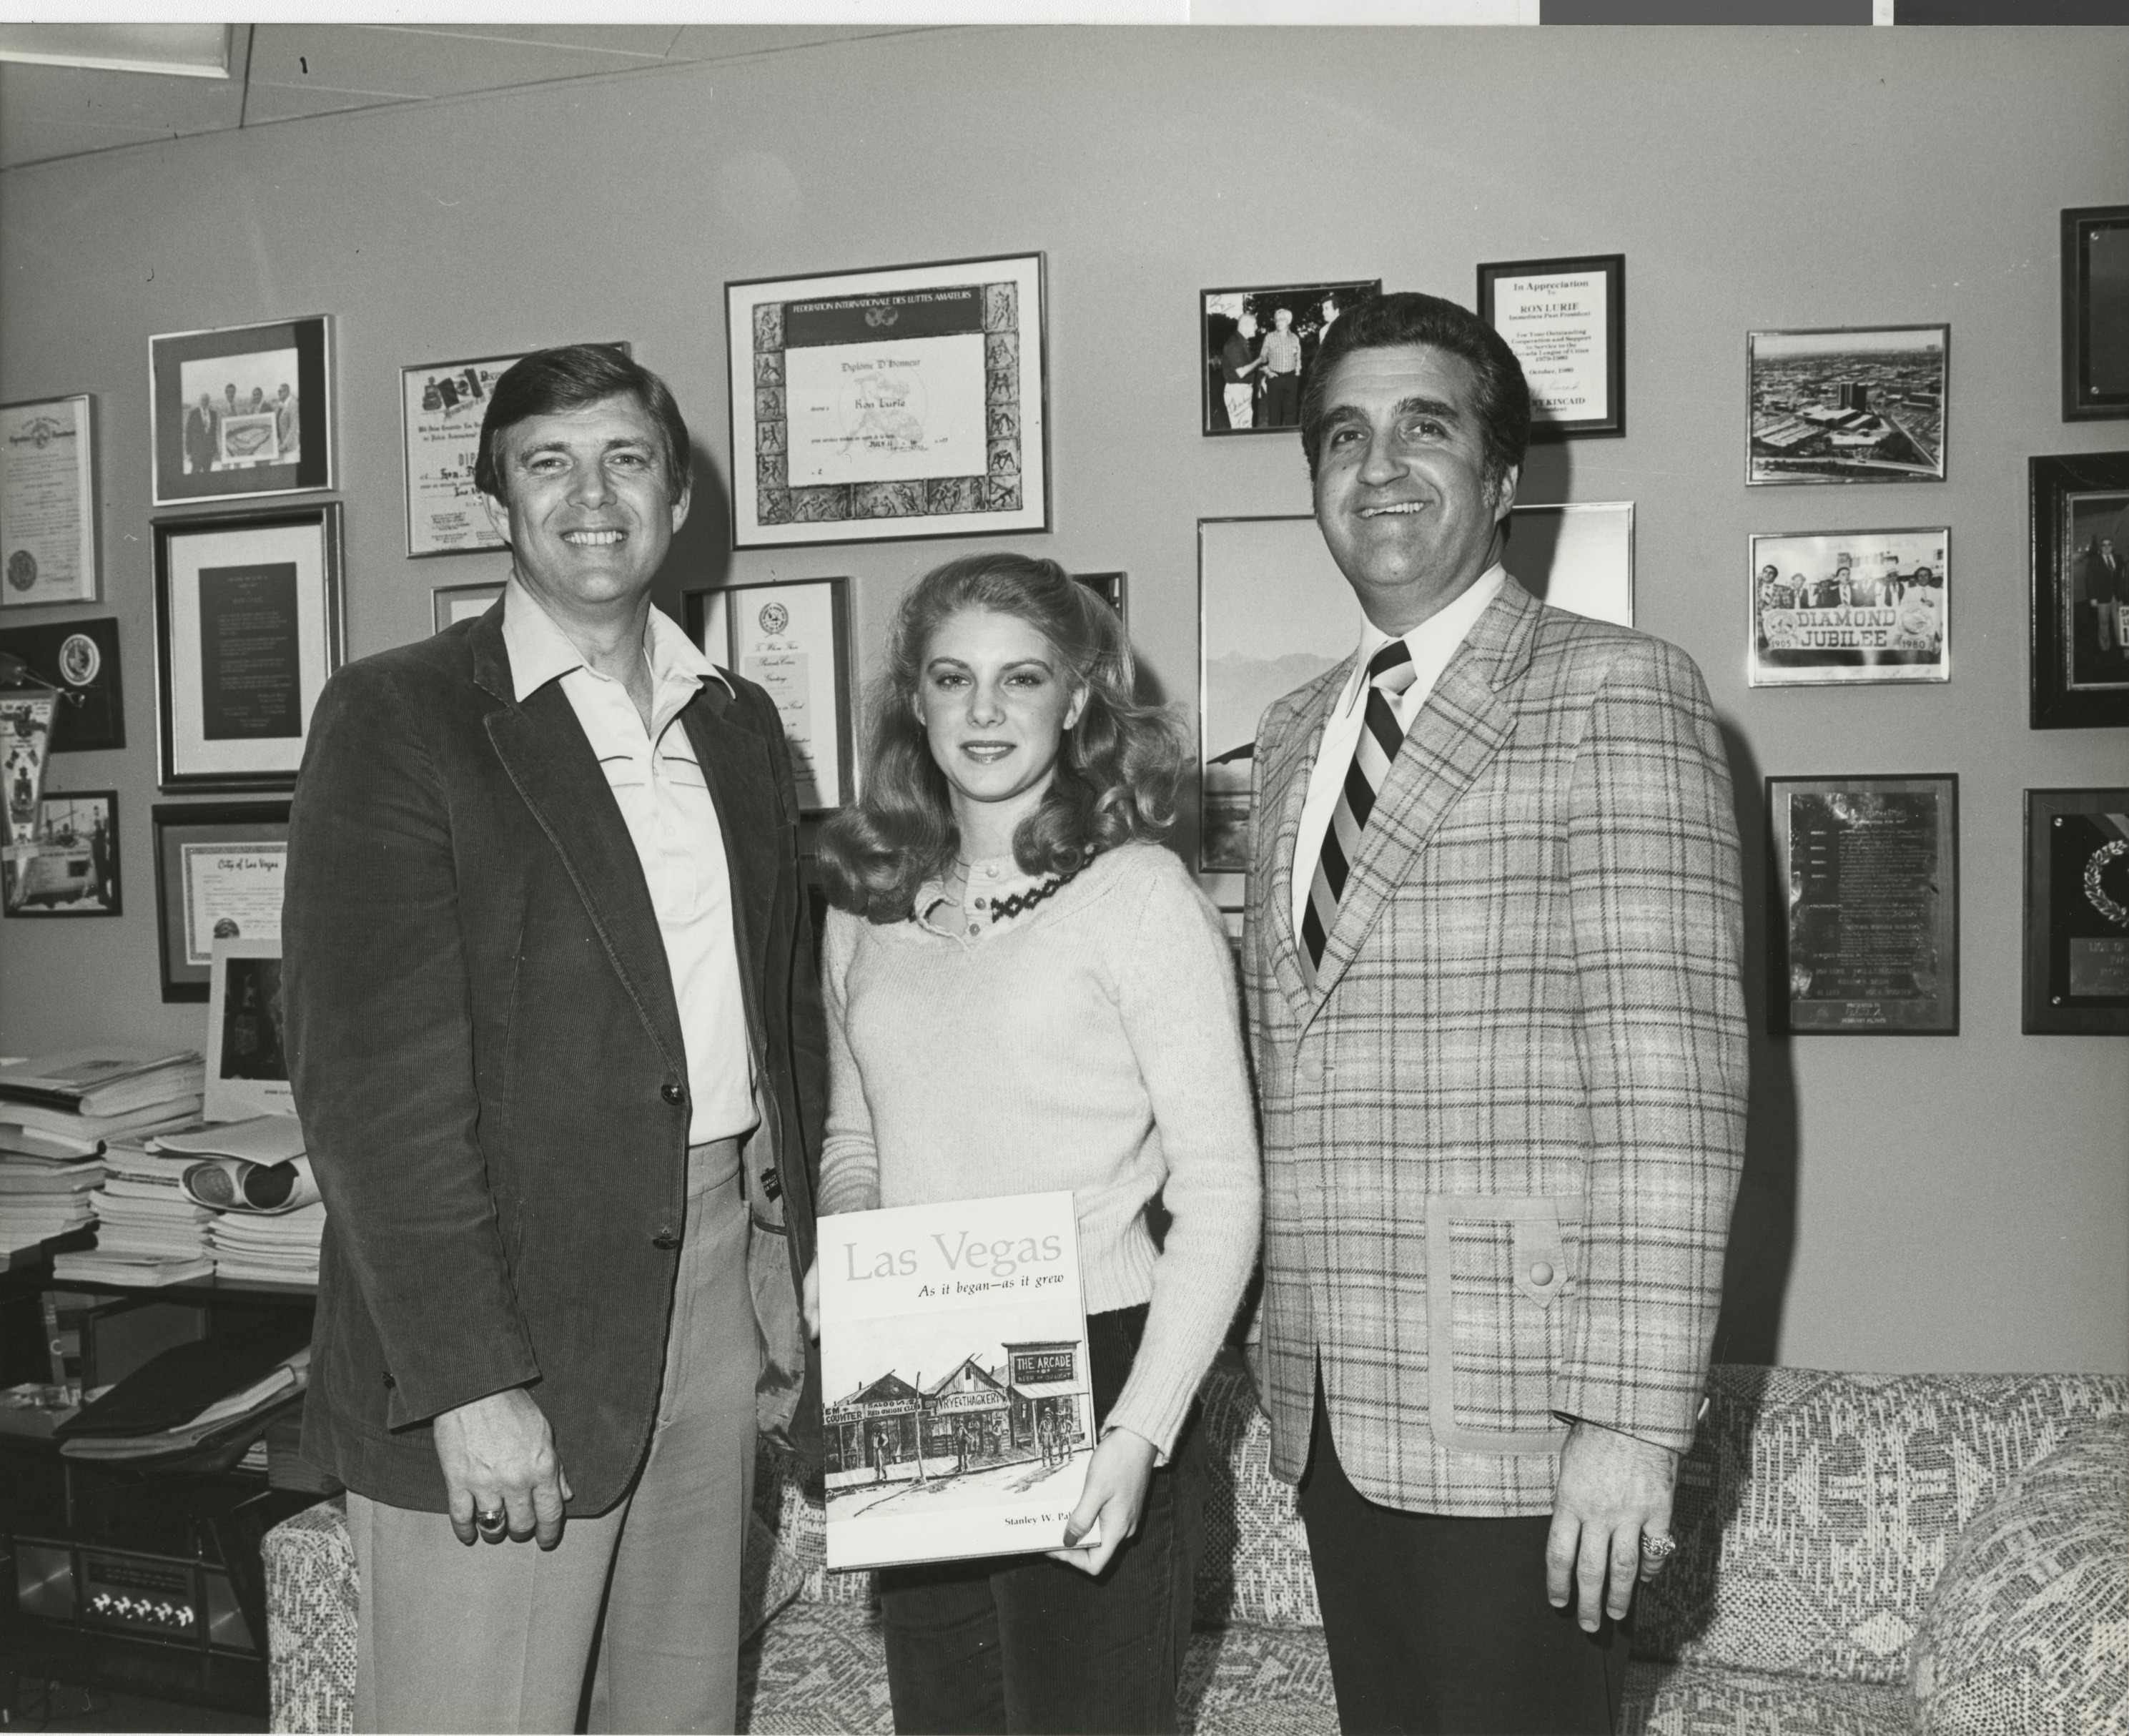 Photograph of Ron Lurie (right) with two others (one holds the book "Las Vegas As it began - As it grew")